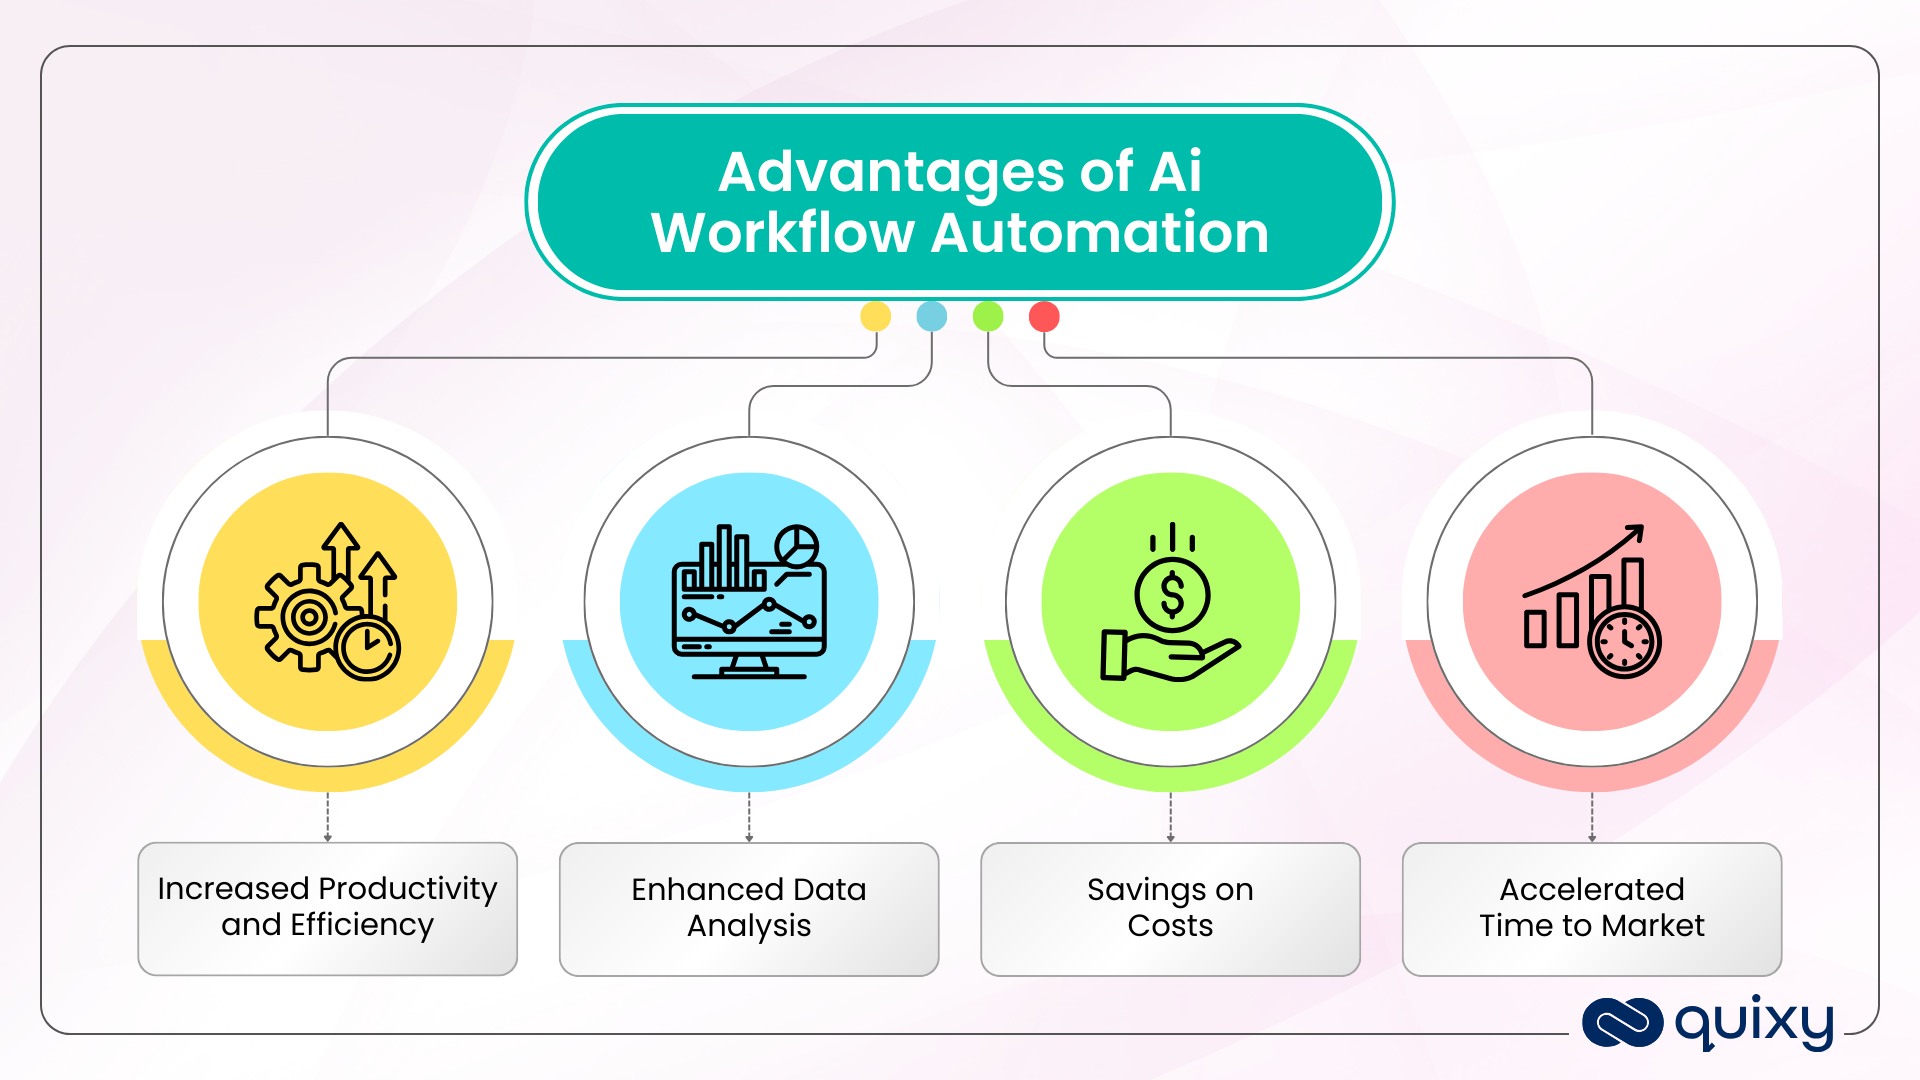 Benefits of AI Workflow Automation